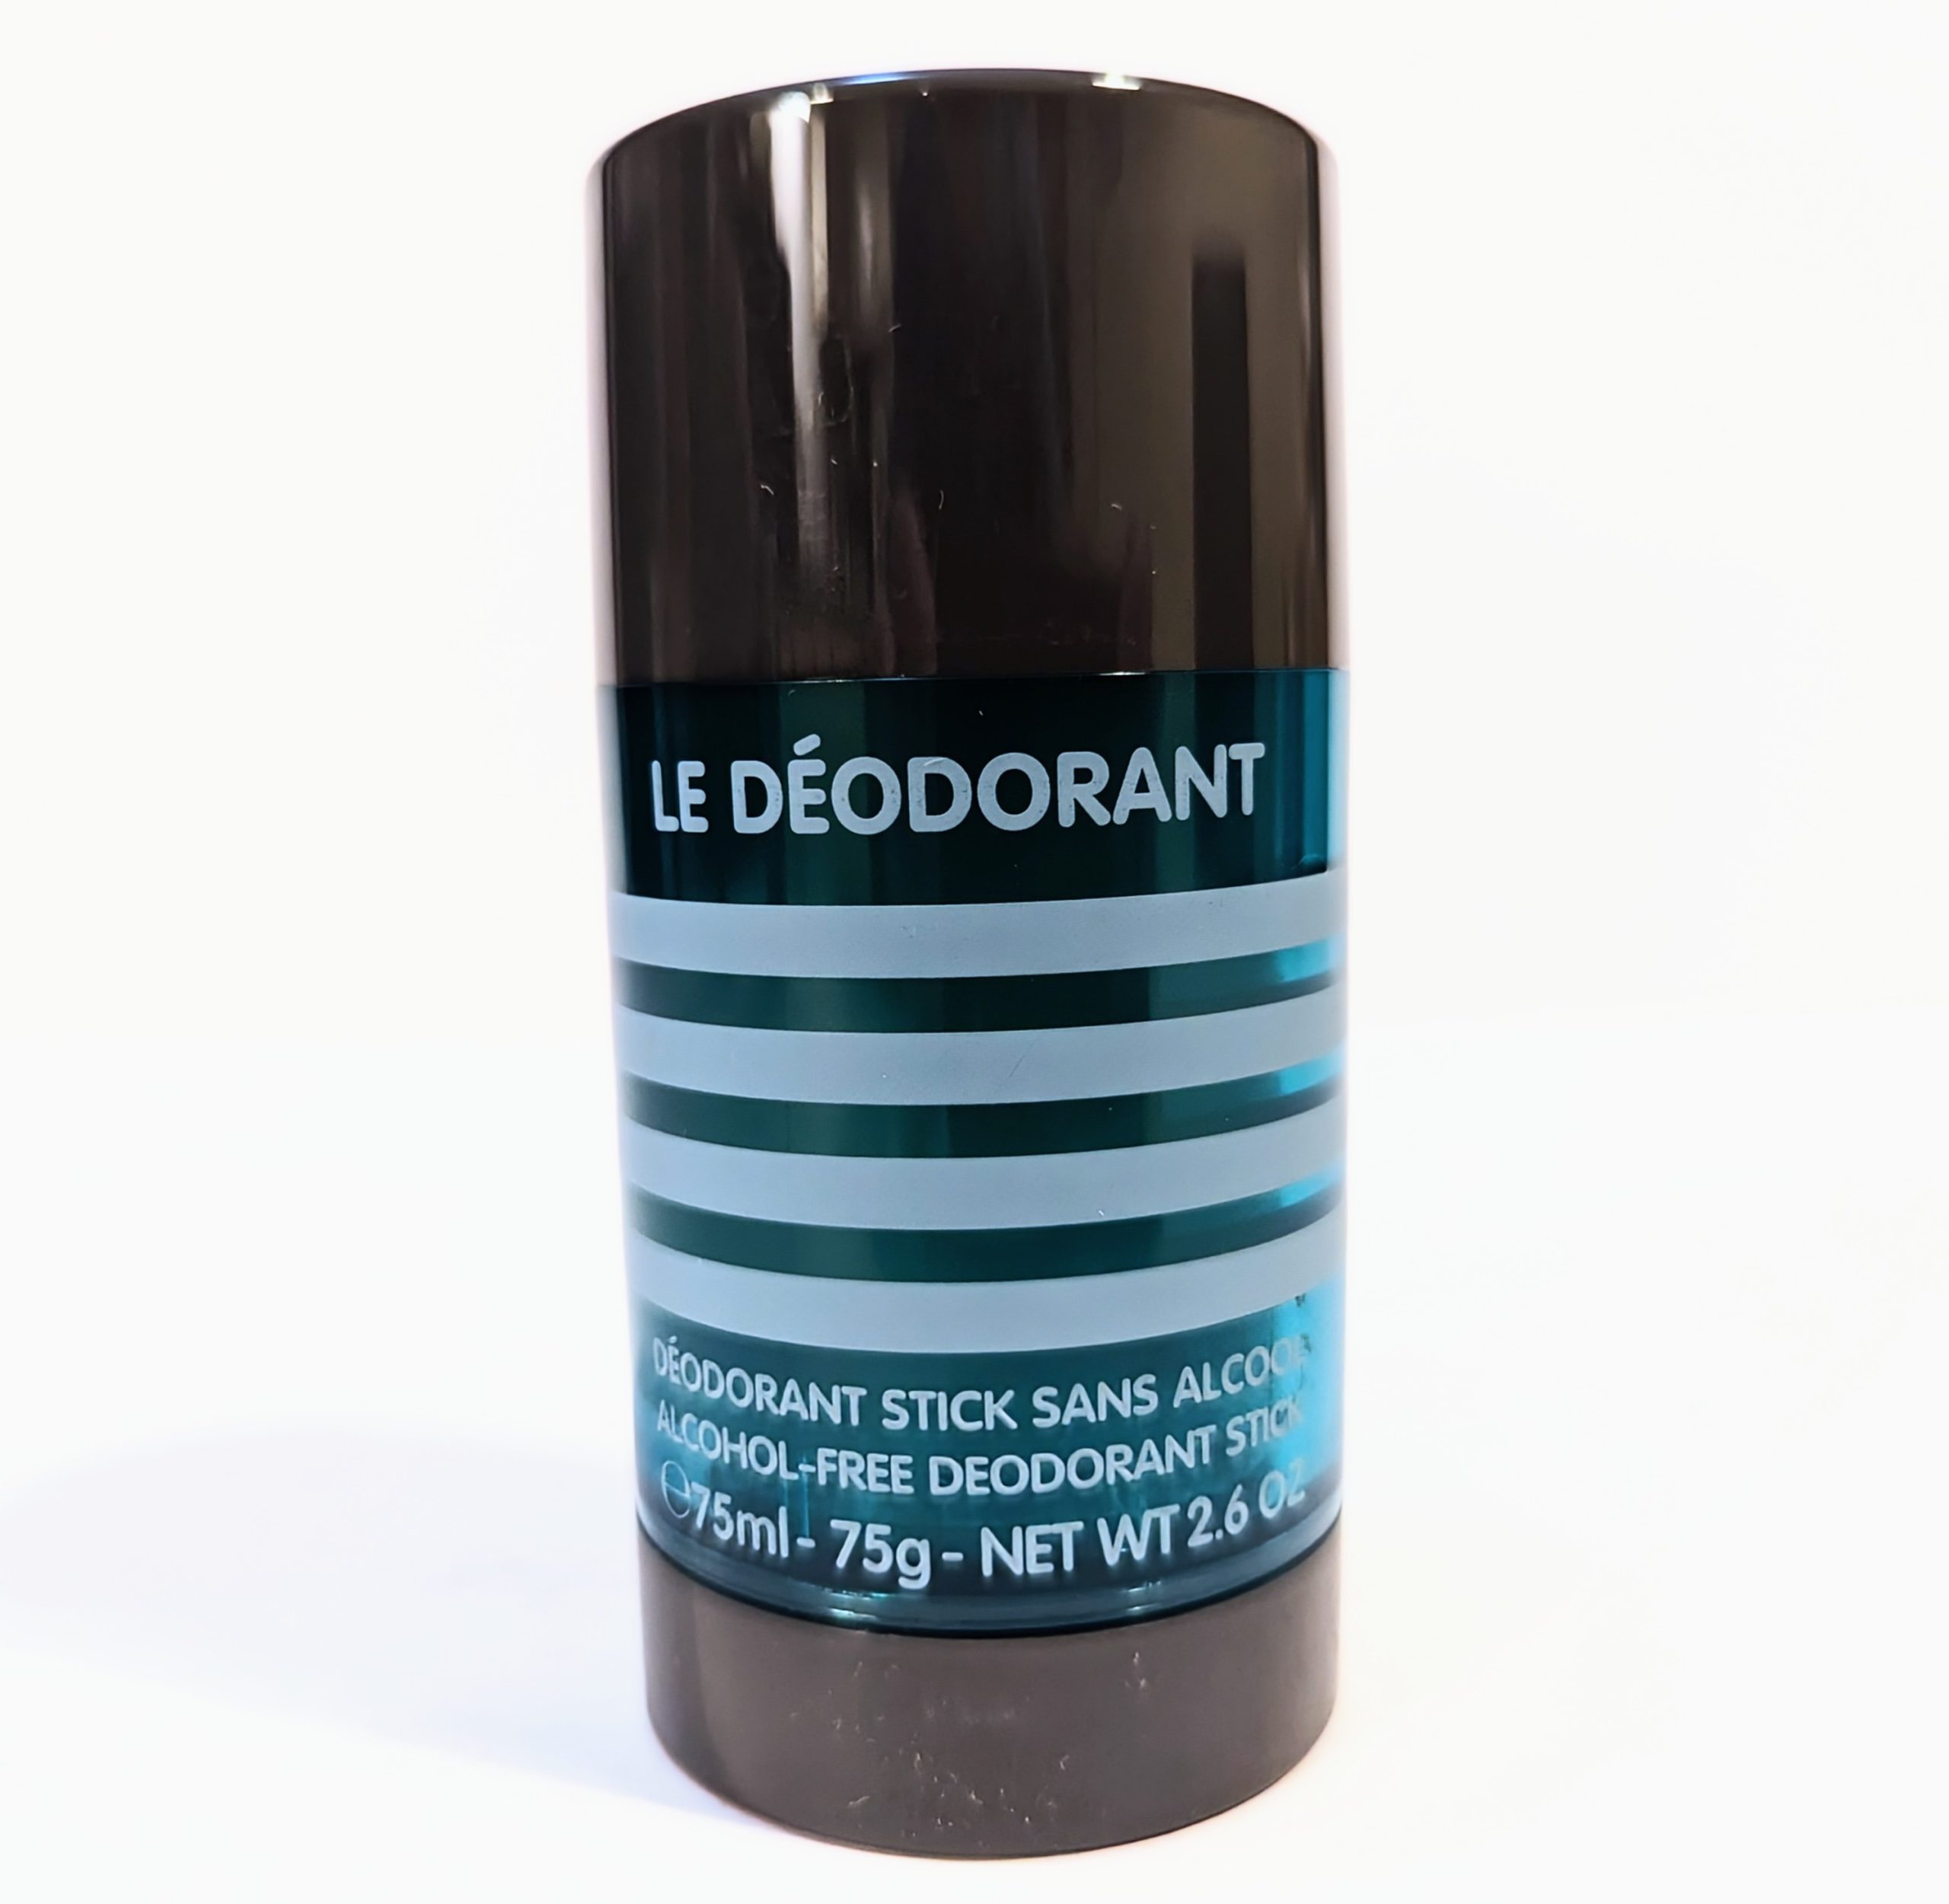 A black cylindrical deodorant stick labeled "Le Déodorant" in blue and white text, noting it is alcohol-free.